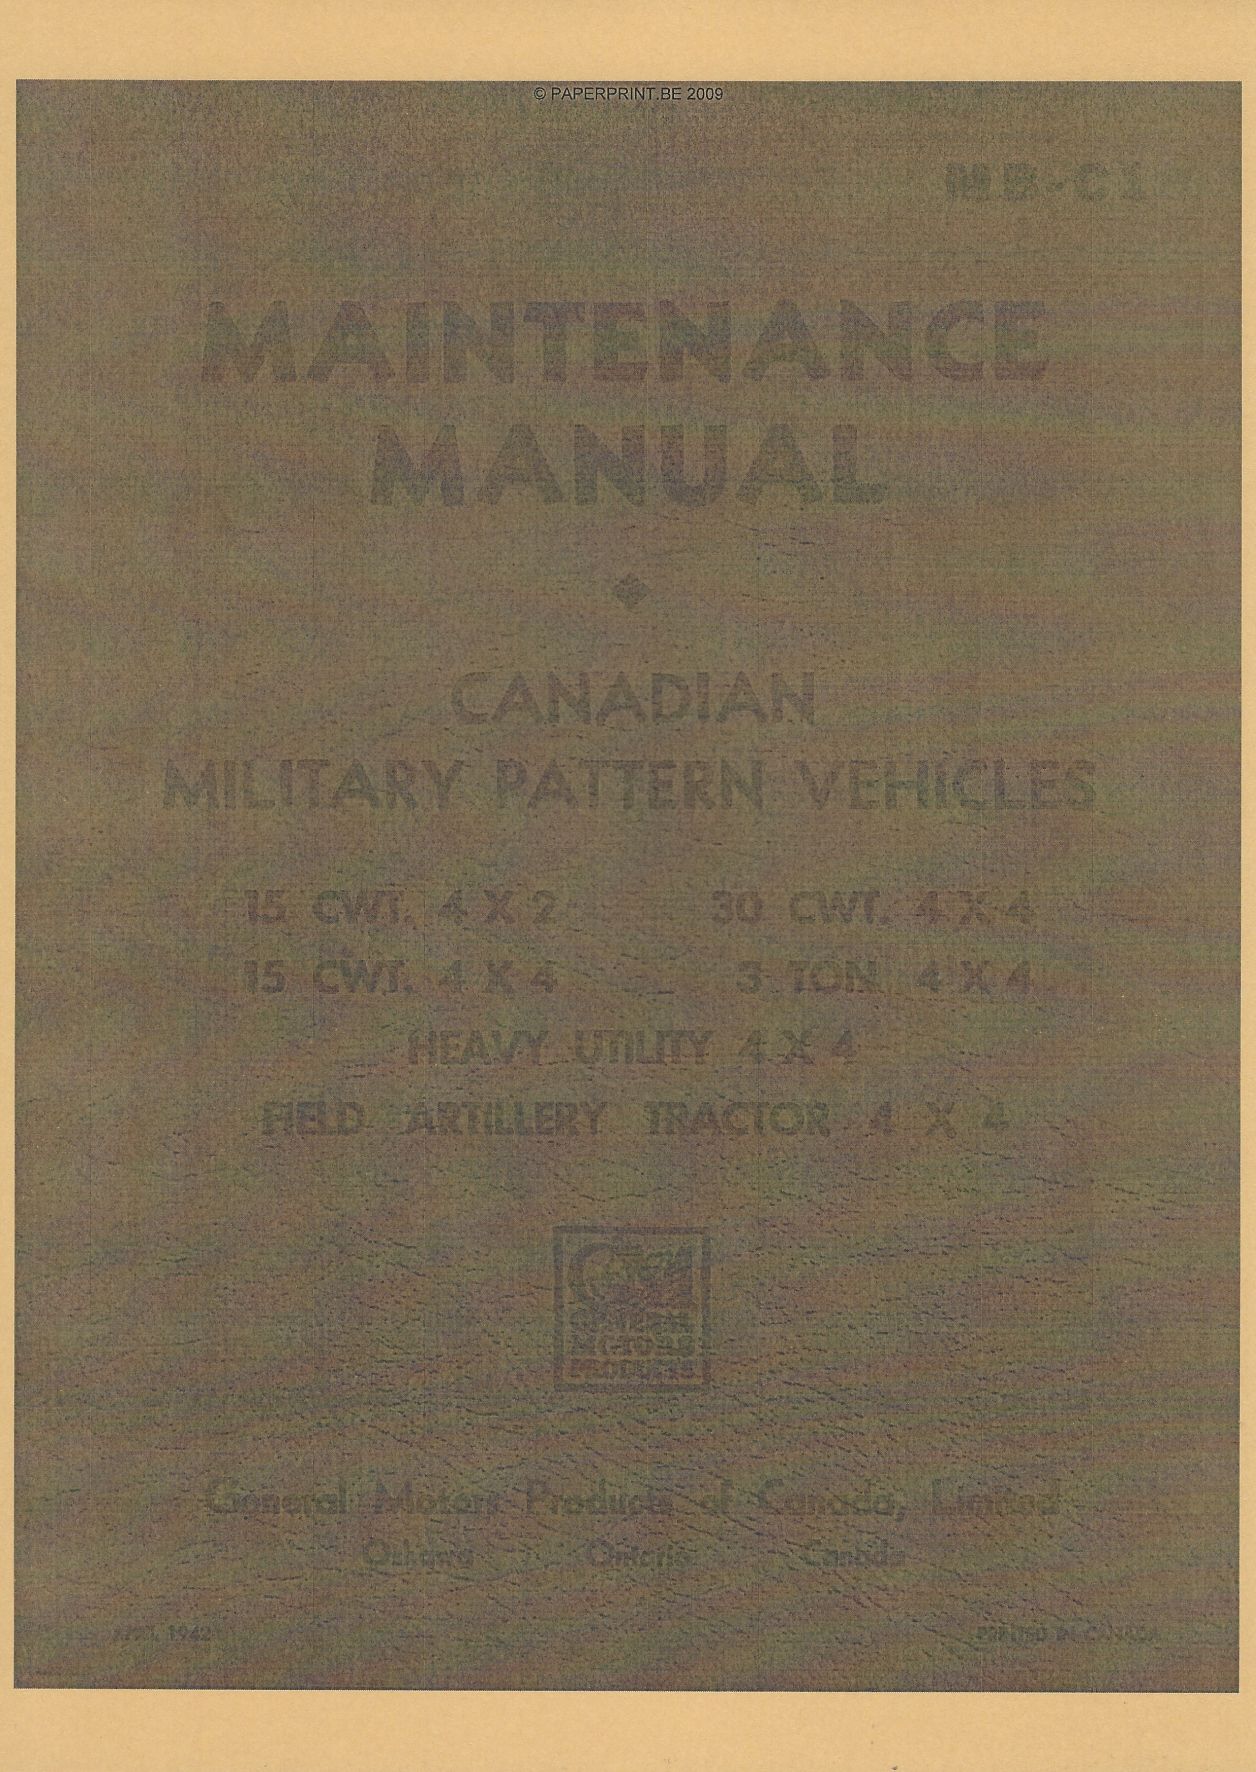 MB-C1 CANADIAN MILITARY PATTERN VEHICLES